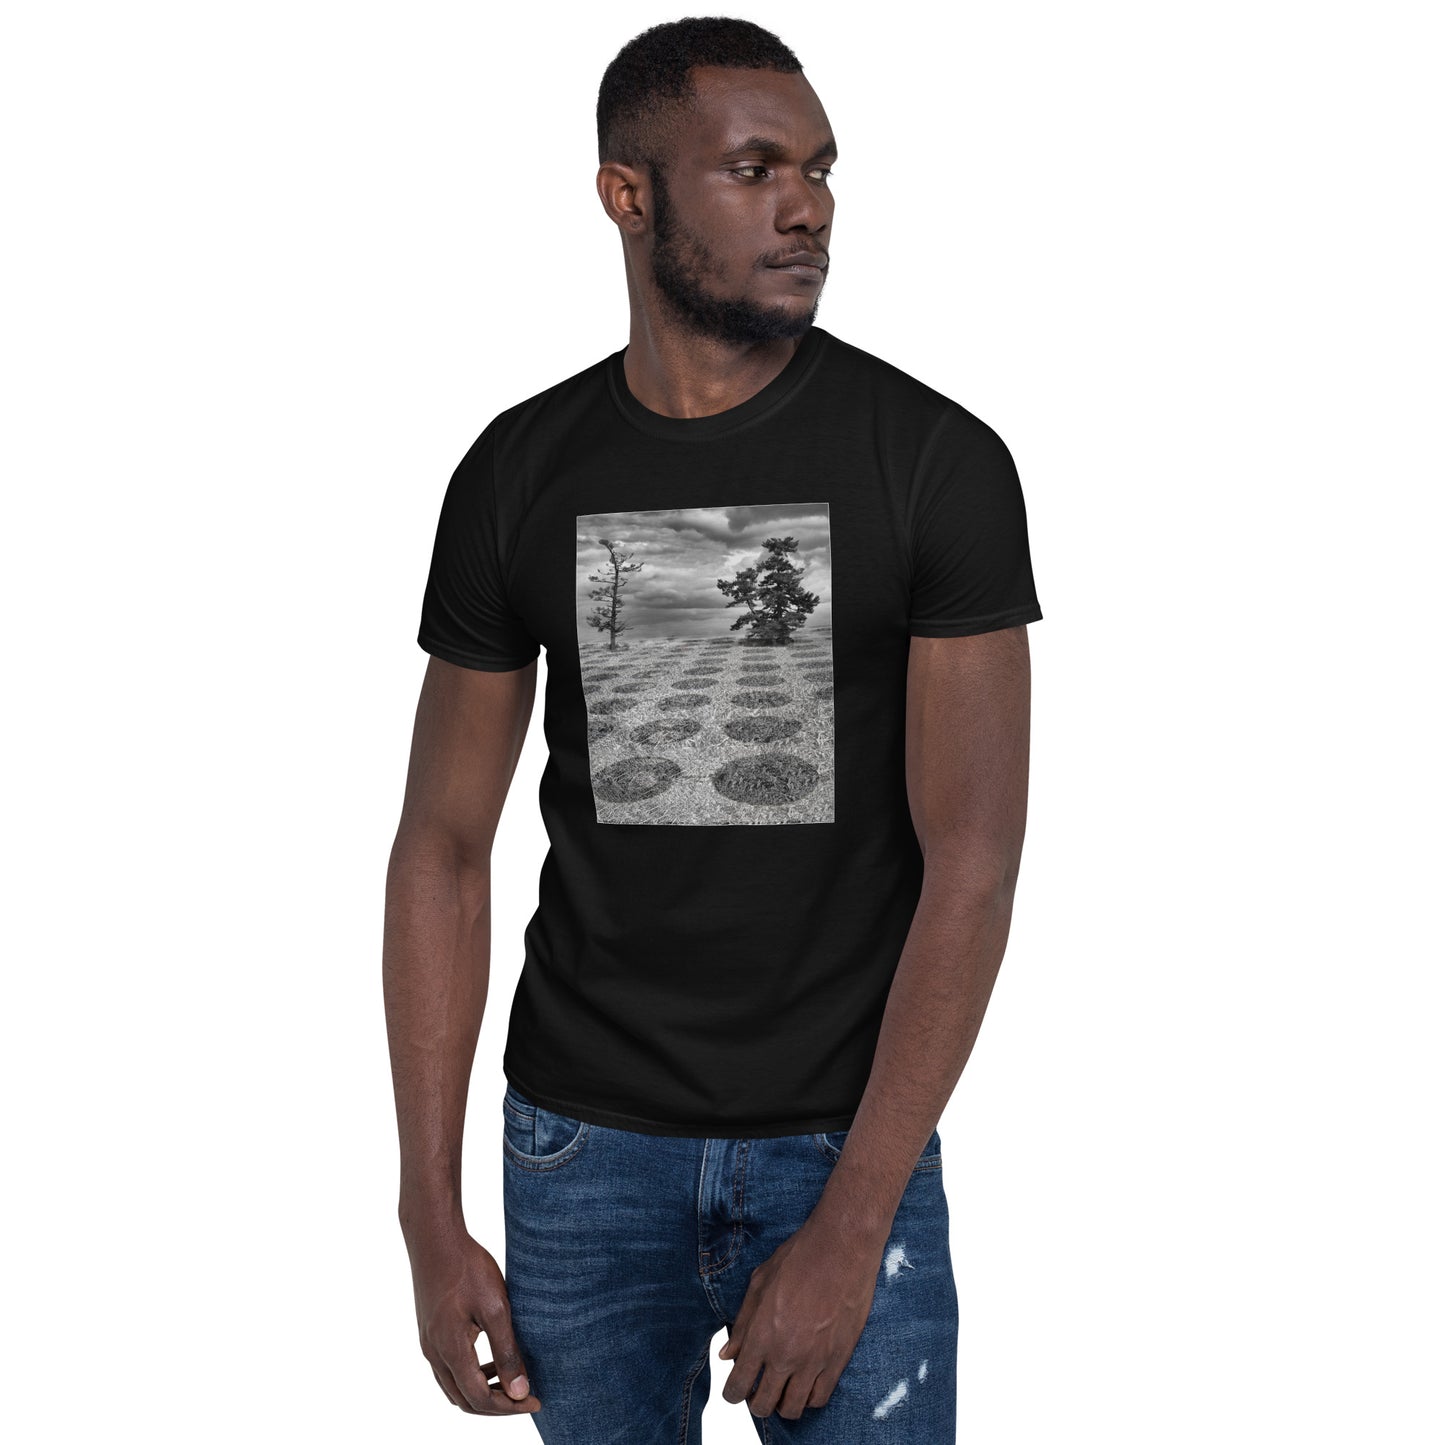 'Where does it stop?' Short-Sleeve Unisex T-Shirt by Jon Butler